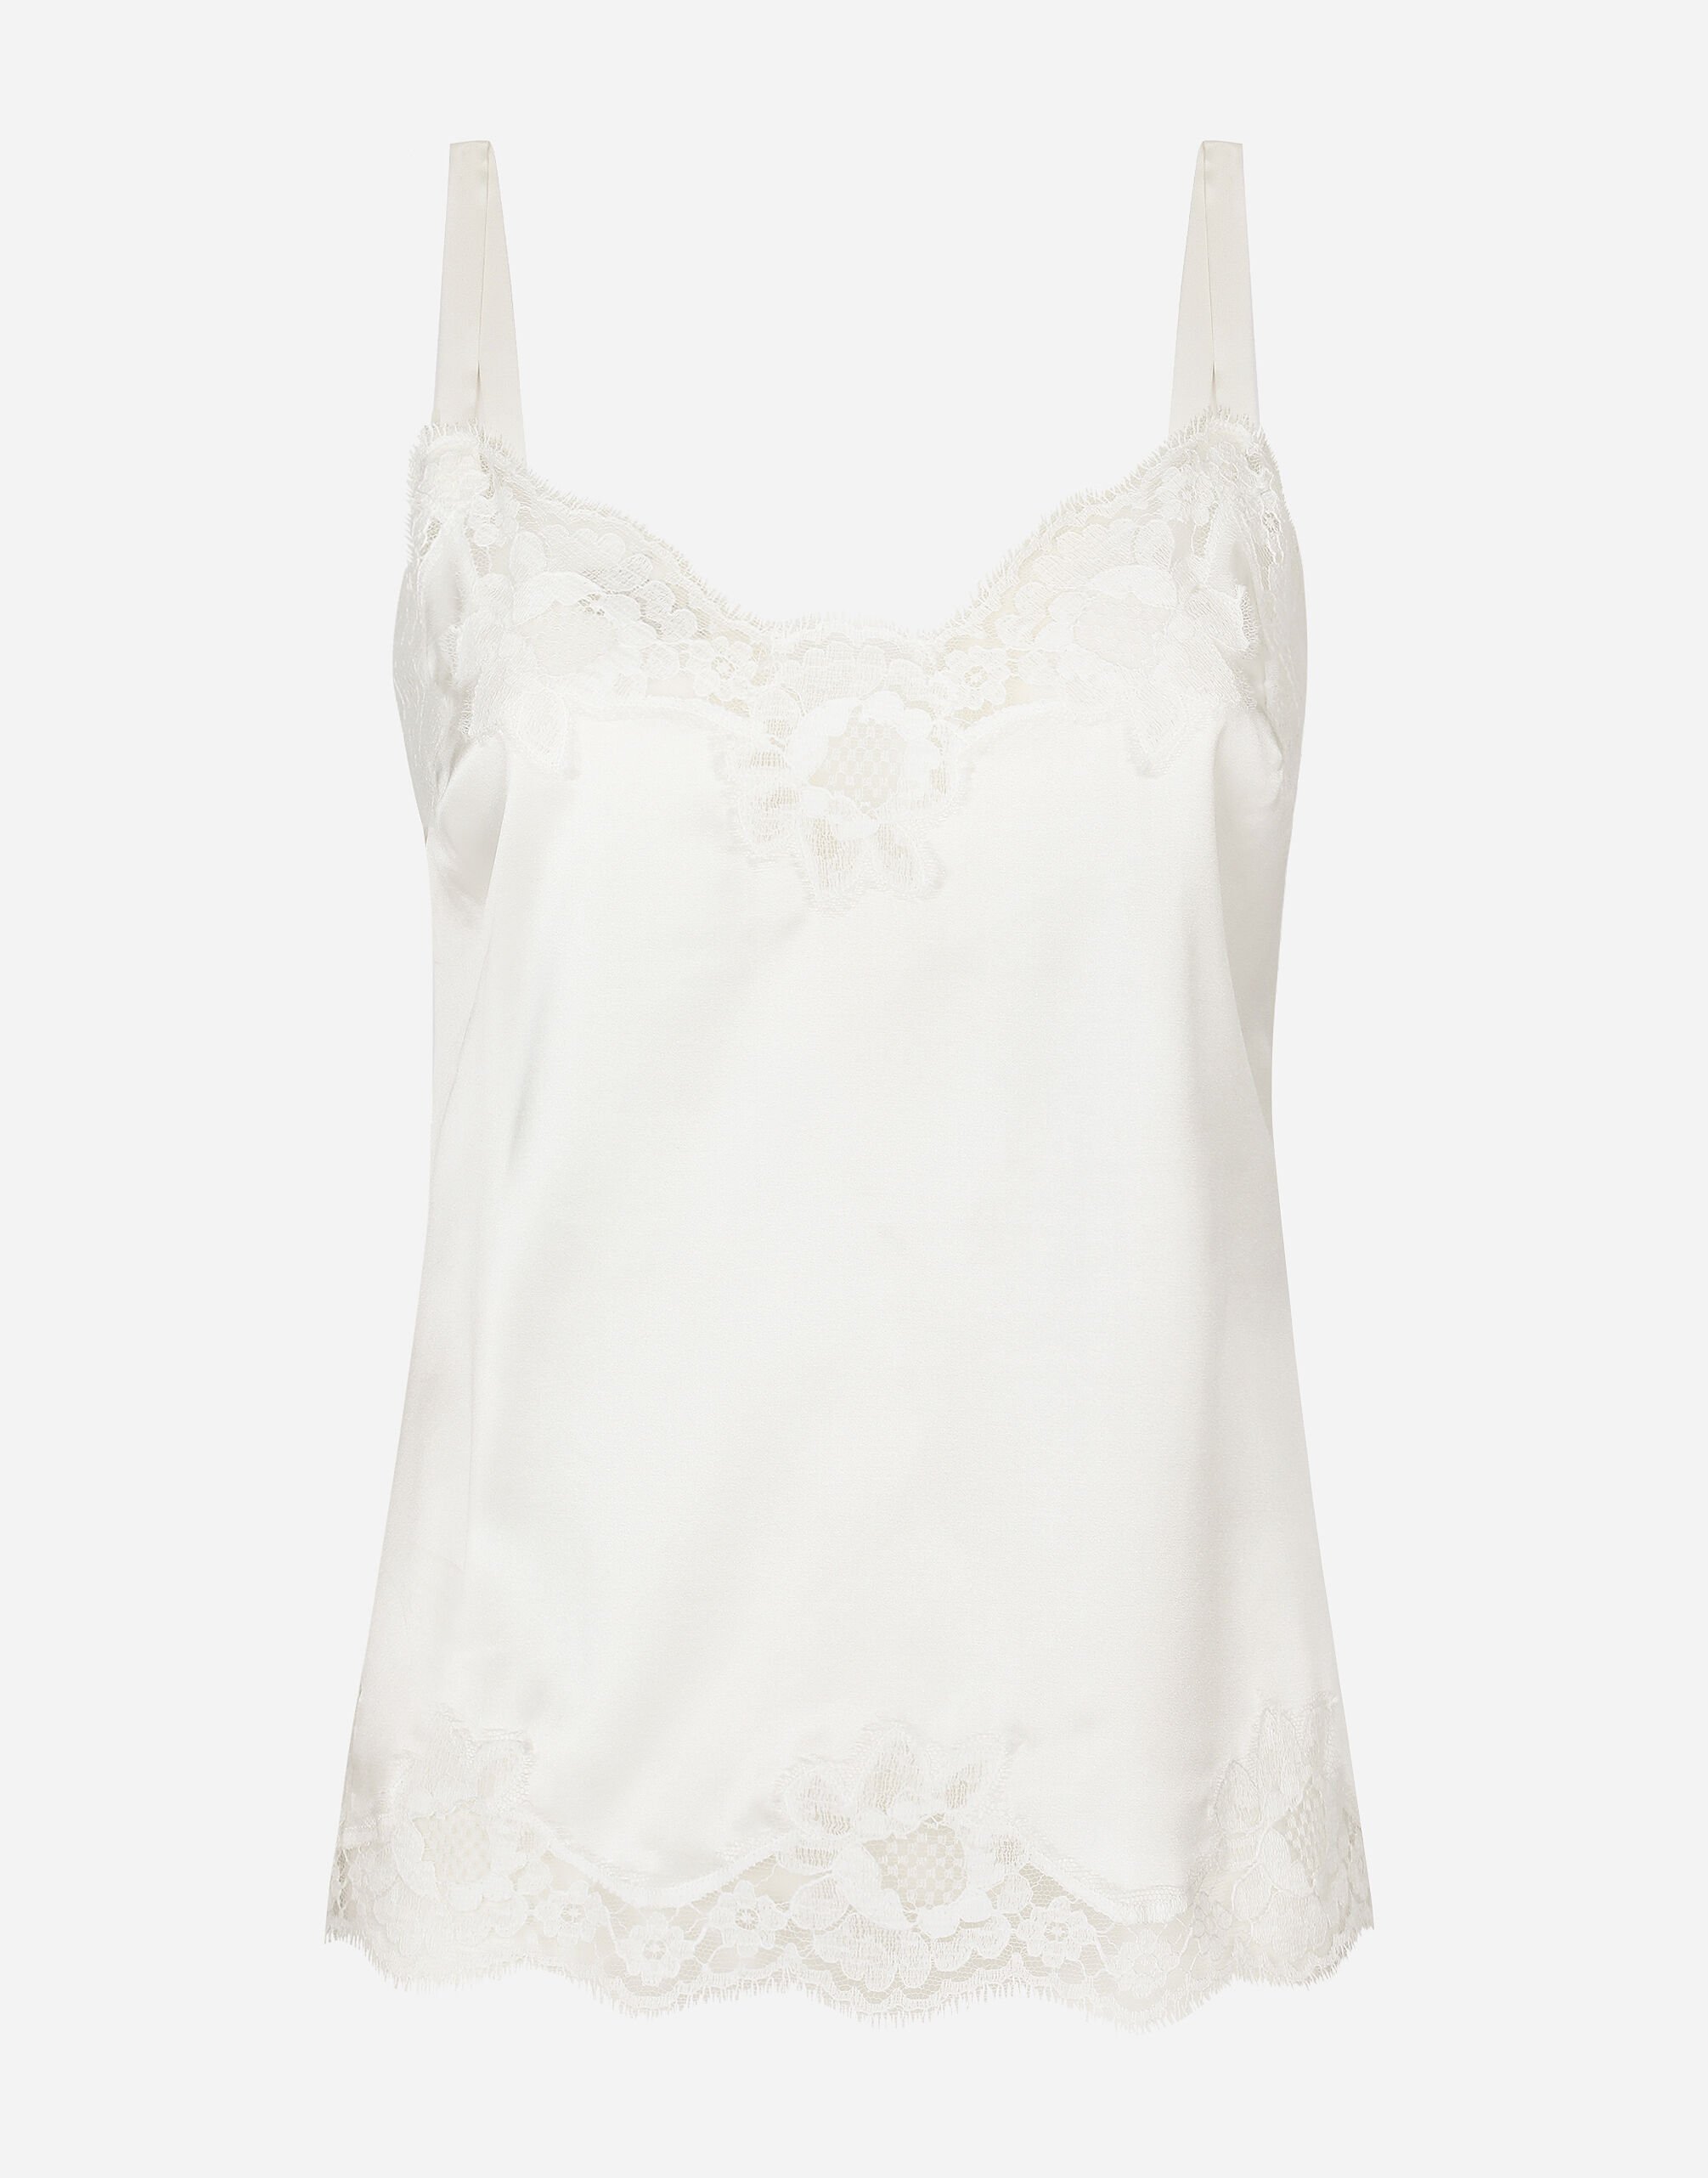 Dolce & Gabbana Satin lingerie-style top with lace detailing Black O7D16TONO26